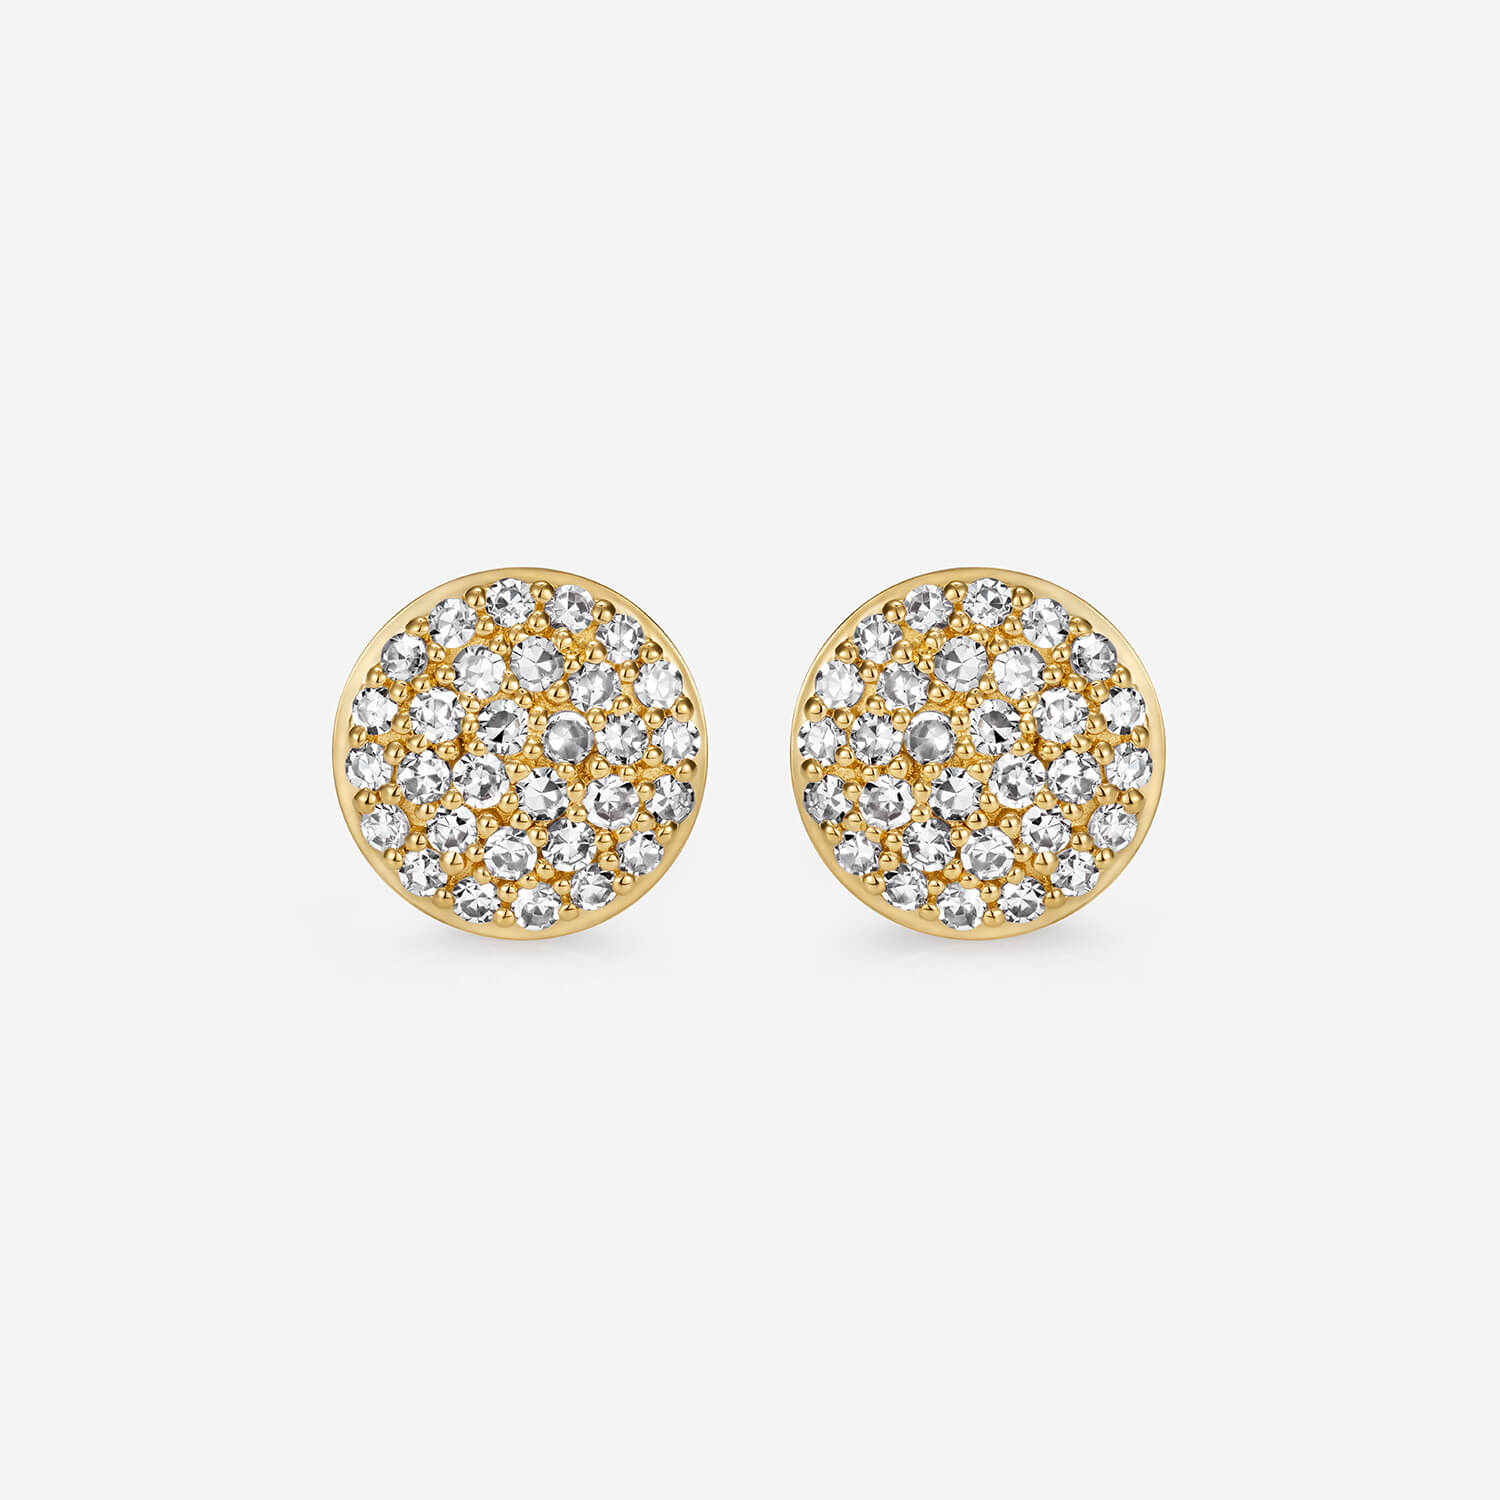 886 Royal Mint Earrings 886 Pavé Large Studs in 18ct Yellow Gold